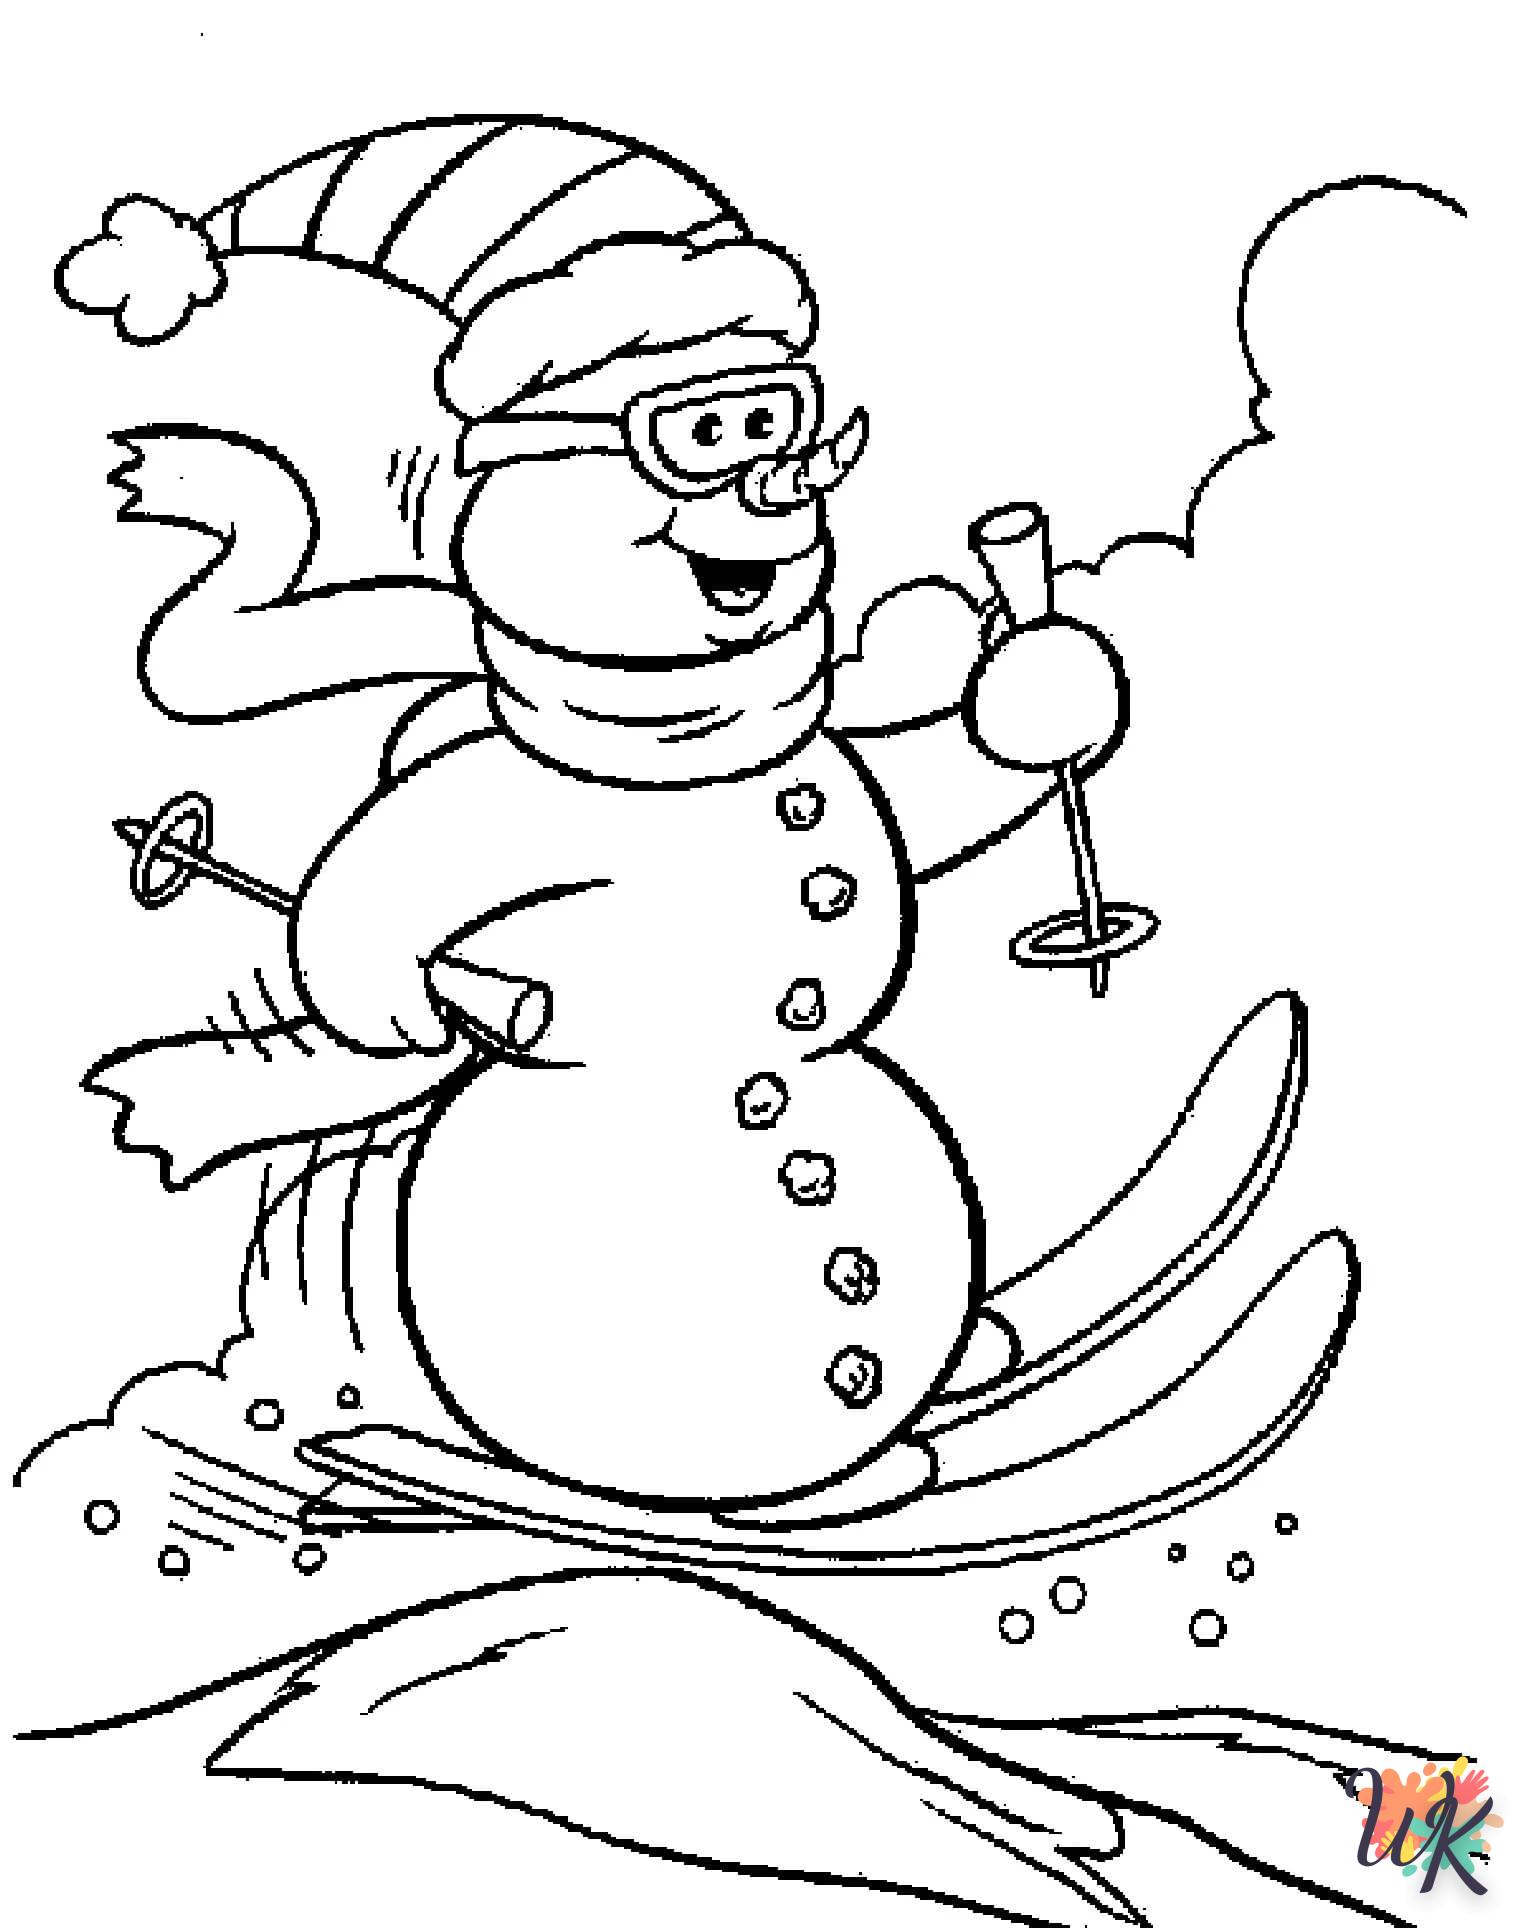 Snowman coloring page to print for children aged 6 years 1